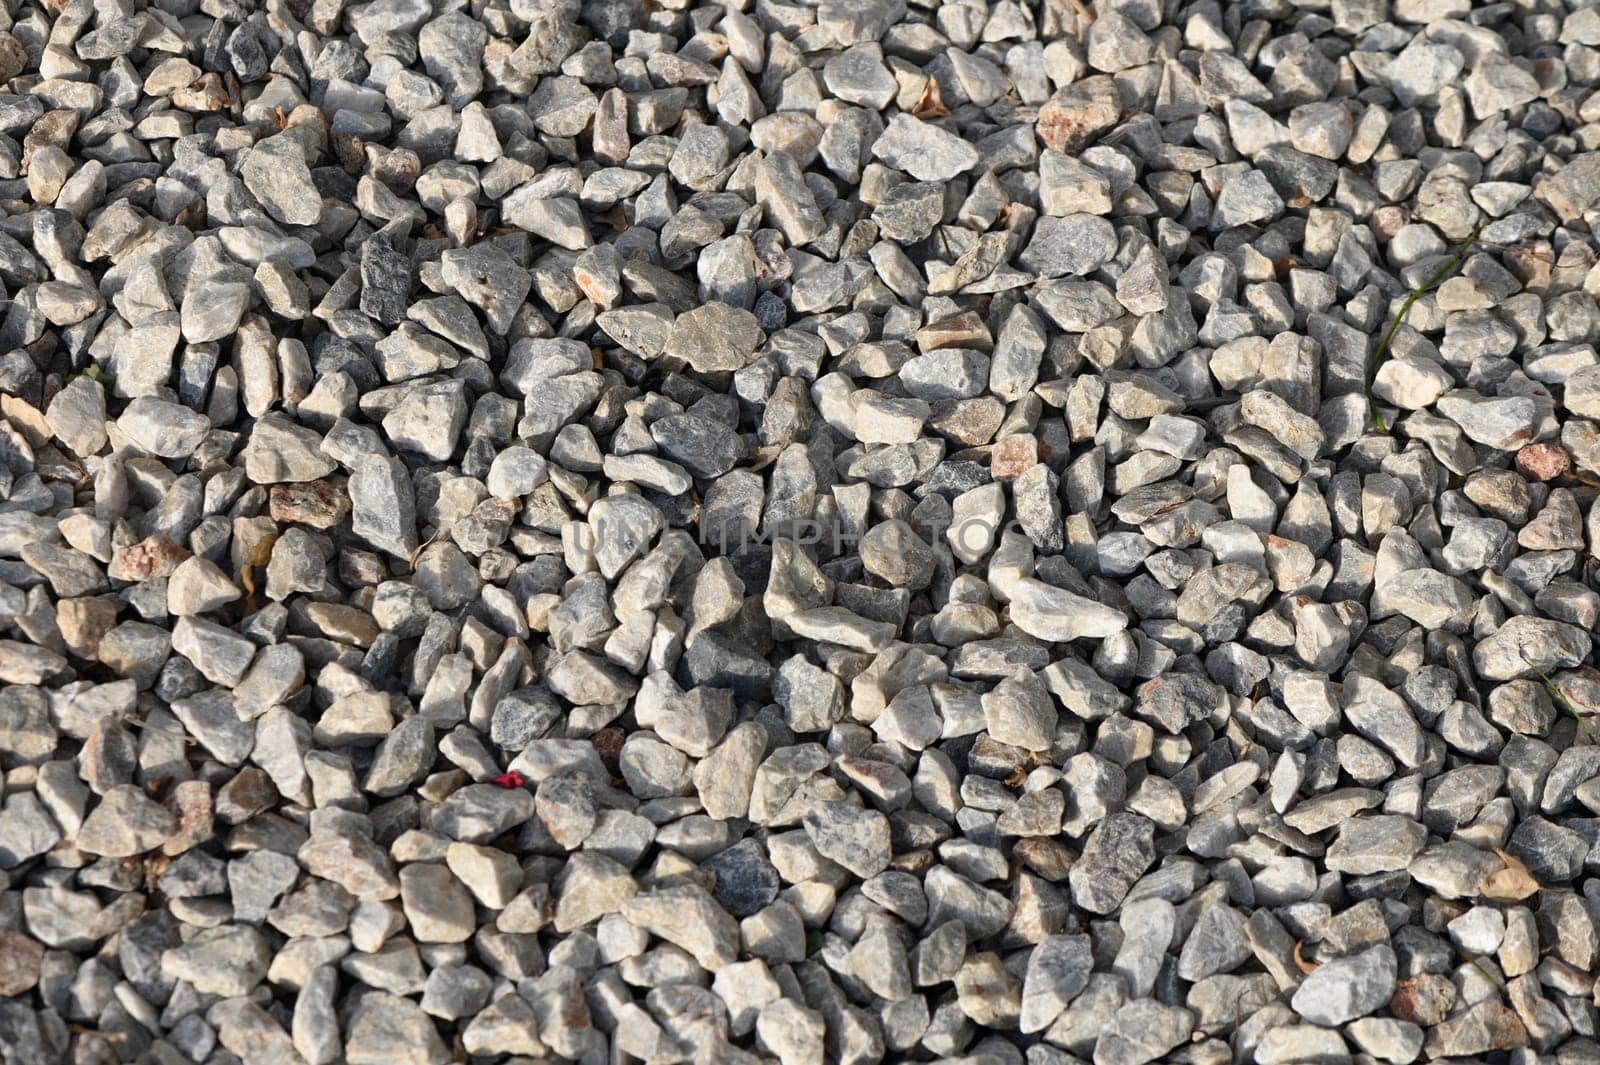 granite crushed stone as a background for photos 2 by Mixa74